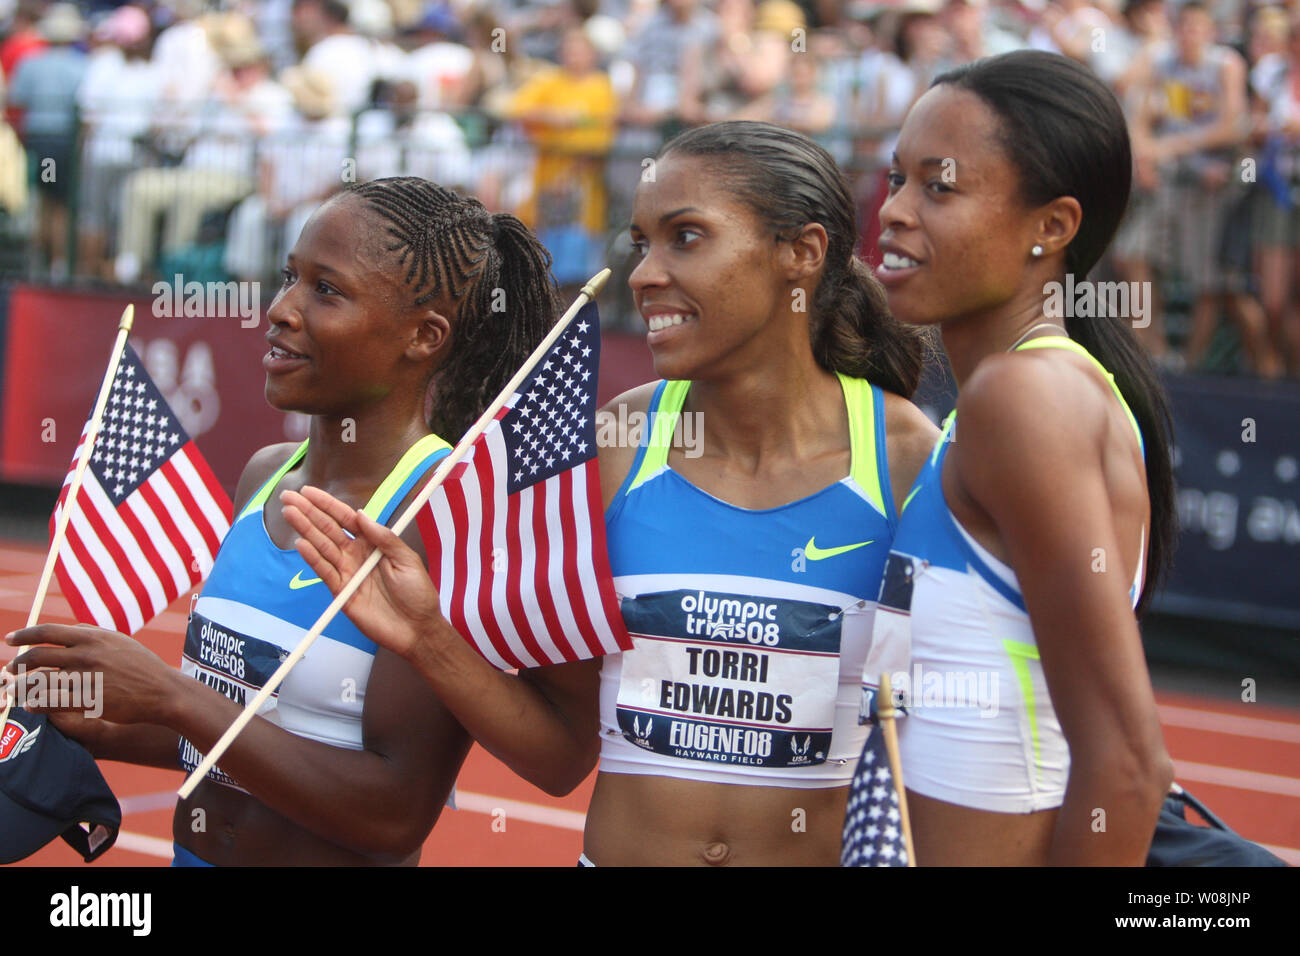 U.S. sprinter Muna Lee (R) makes her move past Torri Edwards (C) and Lauryn Williams wait to be interviewed after the finals of the 100 meters at the USA Track and Field trials in Eugene Oregon on June 28, 2008. Lee won the race, but all three qualified for the U.S. Olympic team.    (UPI Photo/Terry Schmitt) Stock Photo